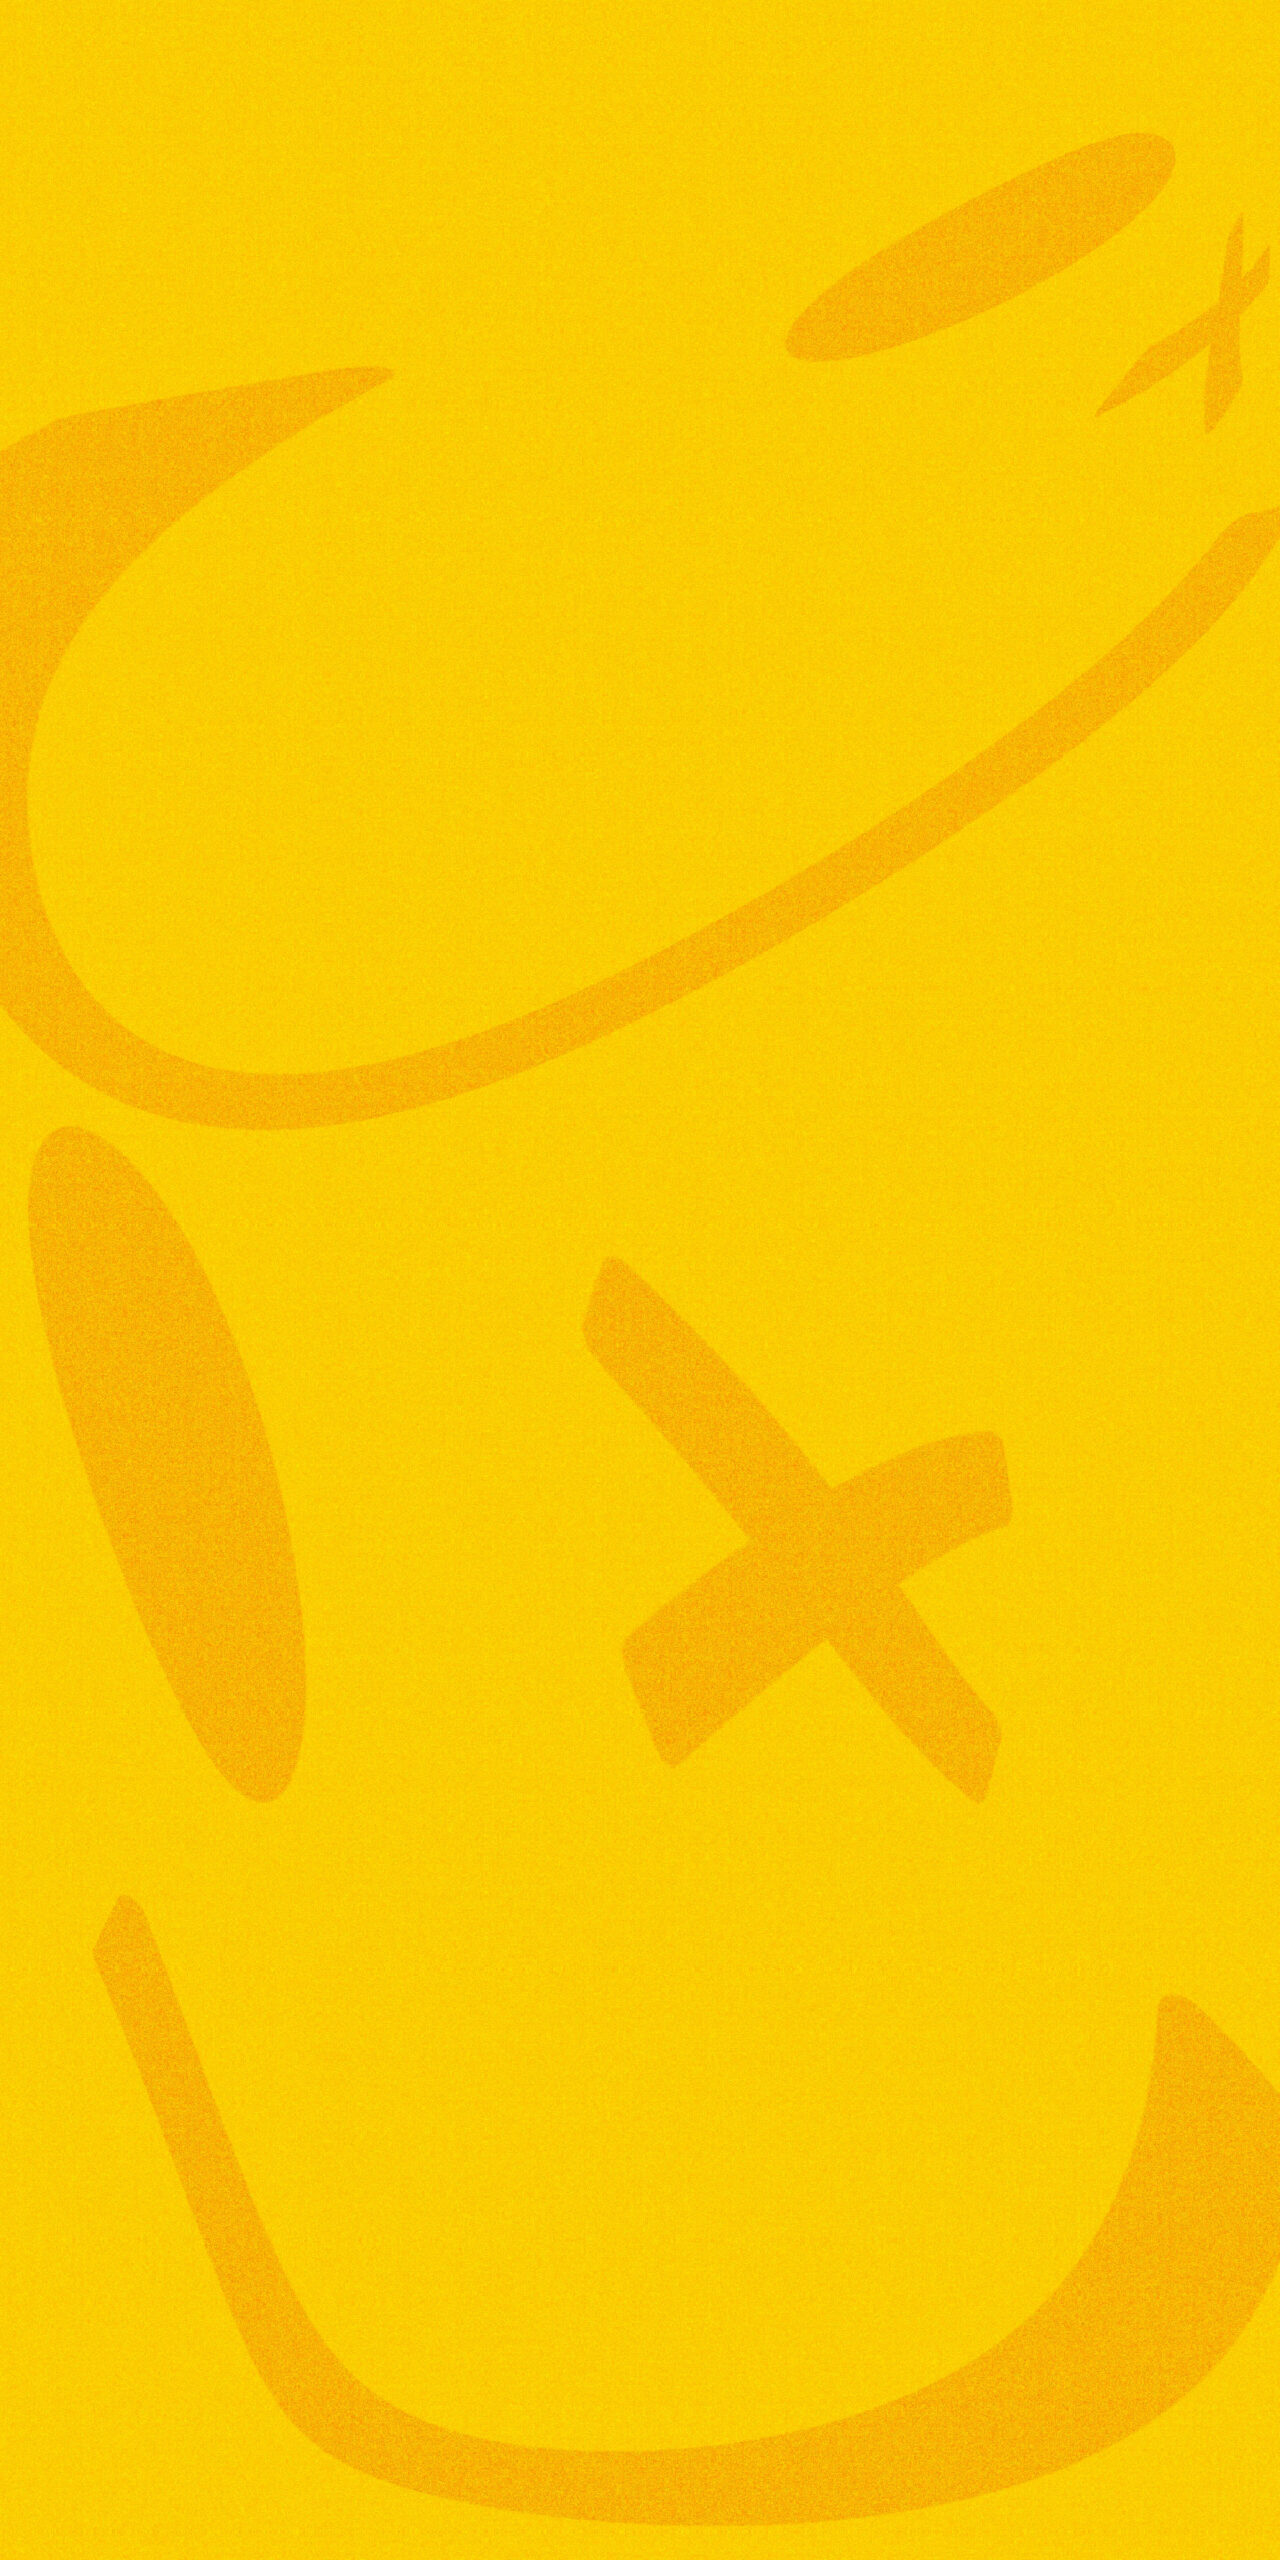 winking smiley face yellow background